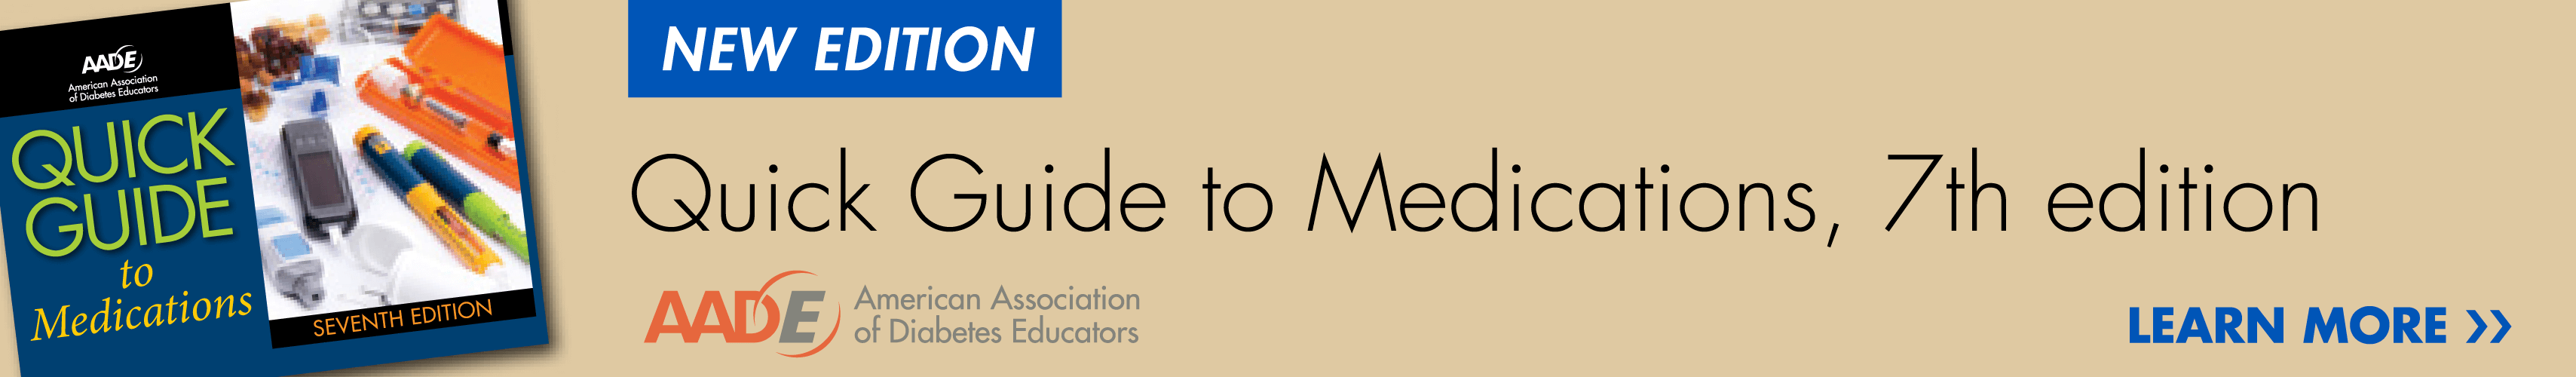 AADE-quick-guide-to-meds-ad-41-6-rev